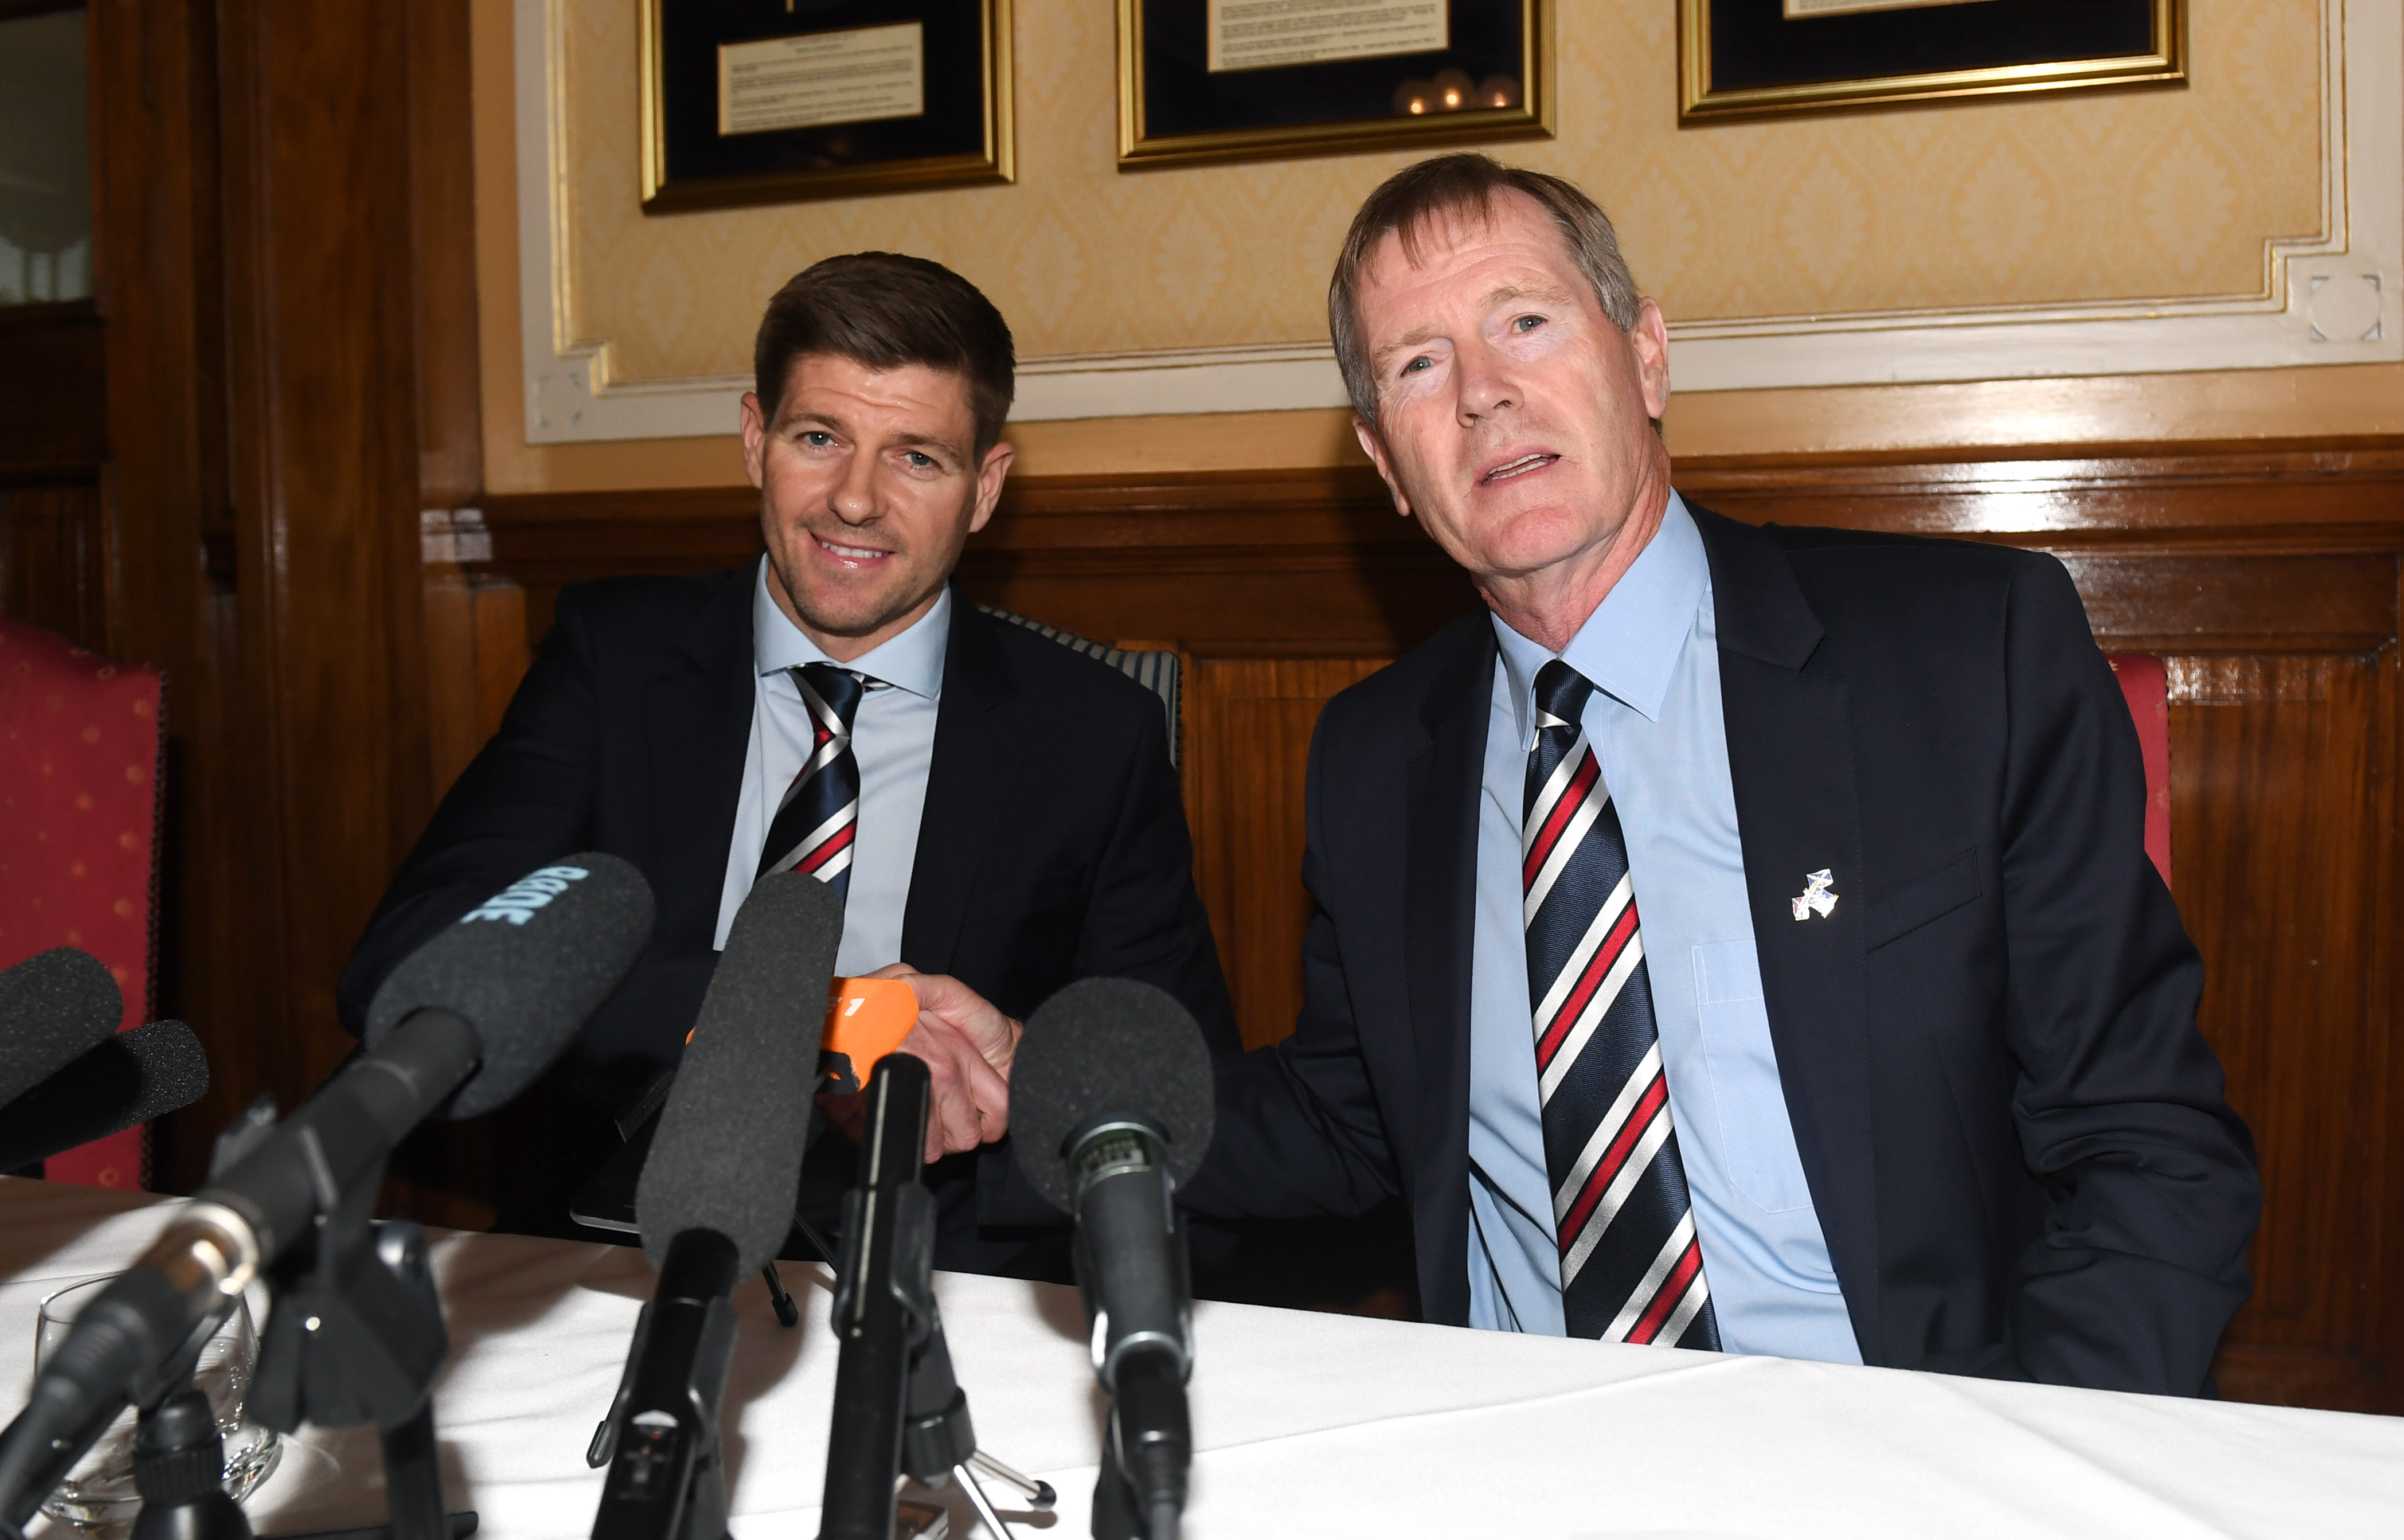 Rangers manager Steven Gerrard shakes hands with Chairman Dave King on the day of his appointment